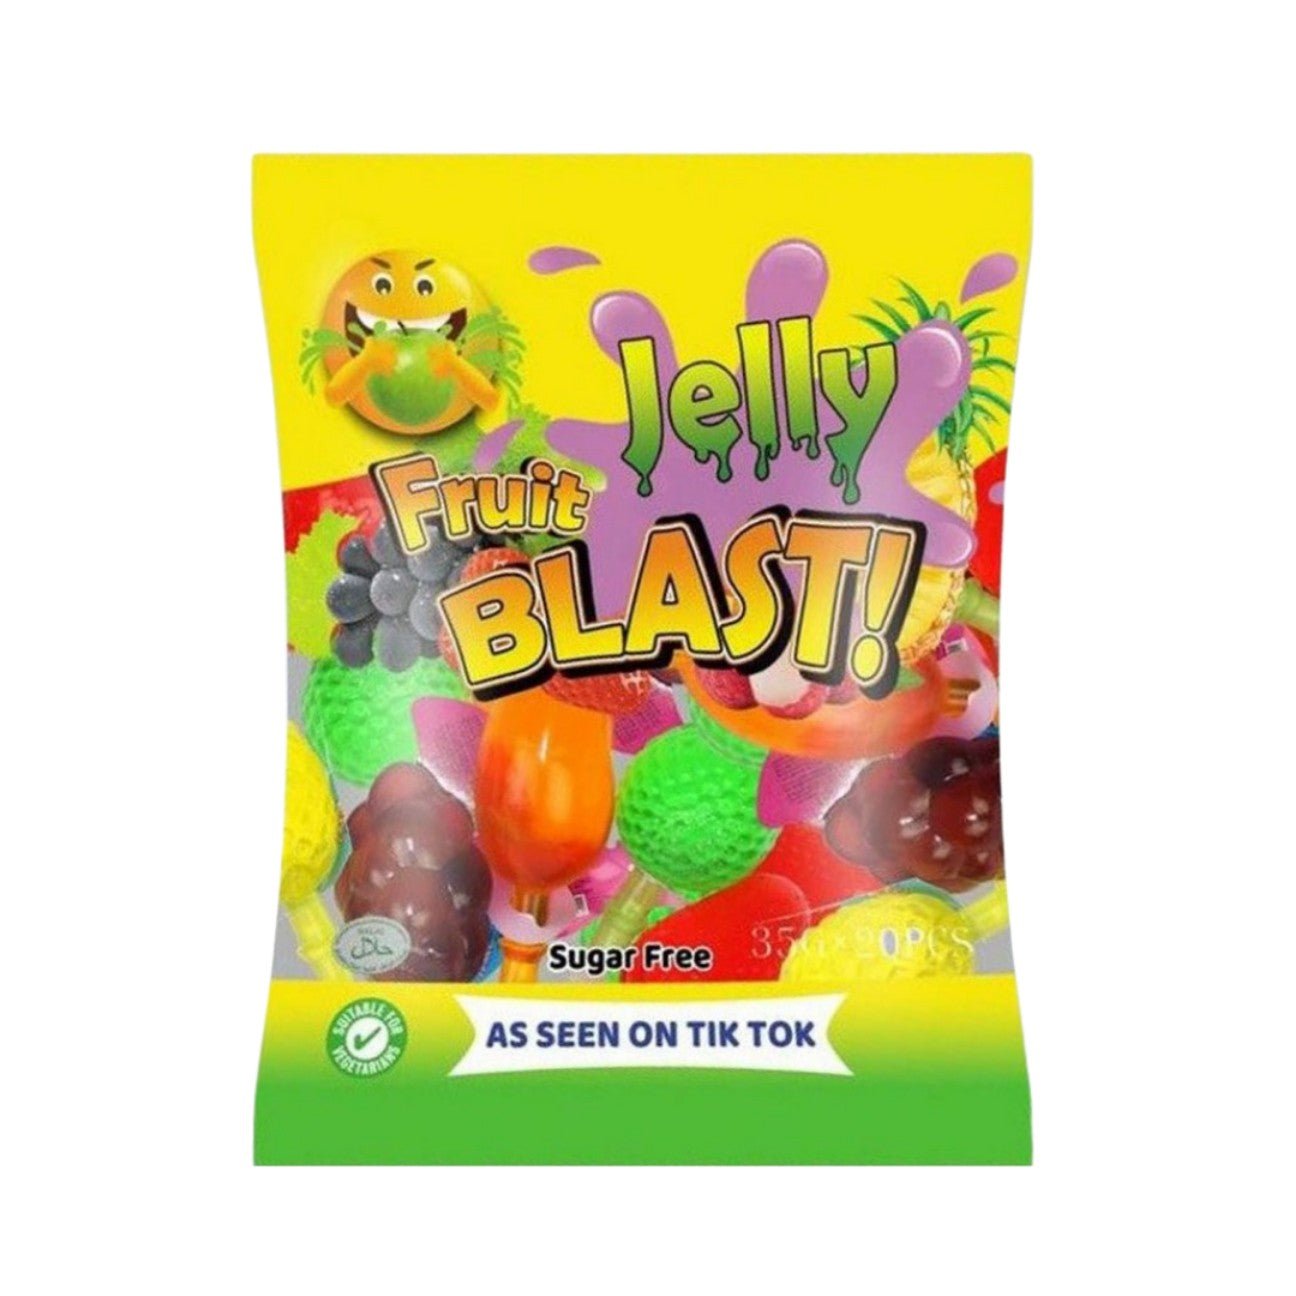 Jelly Fruit Blasts Sugar Free 20 Pack - Jessica's Sweets